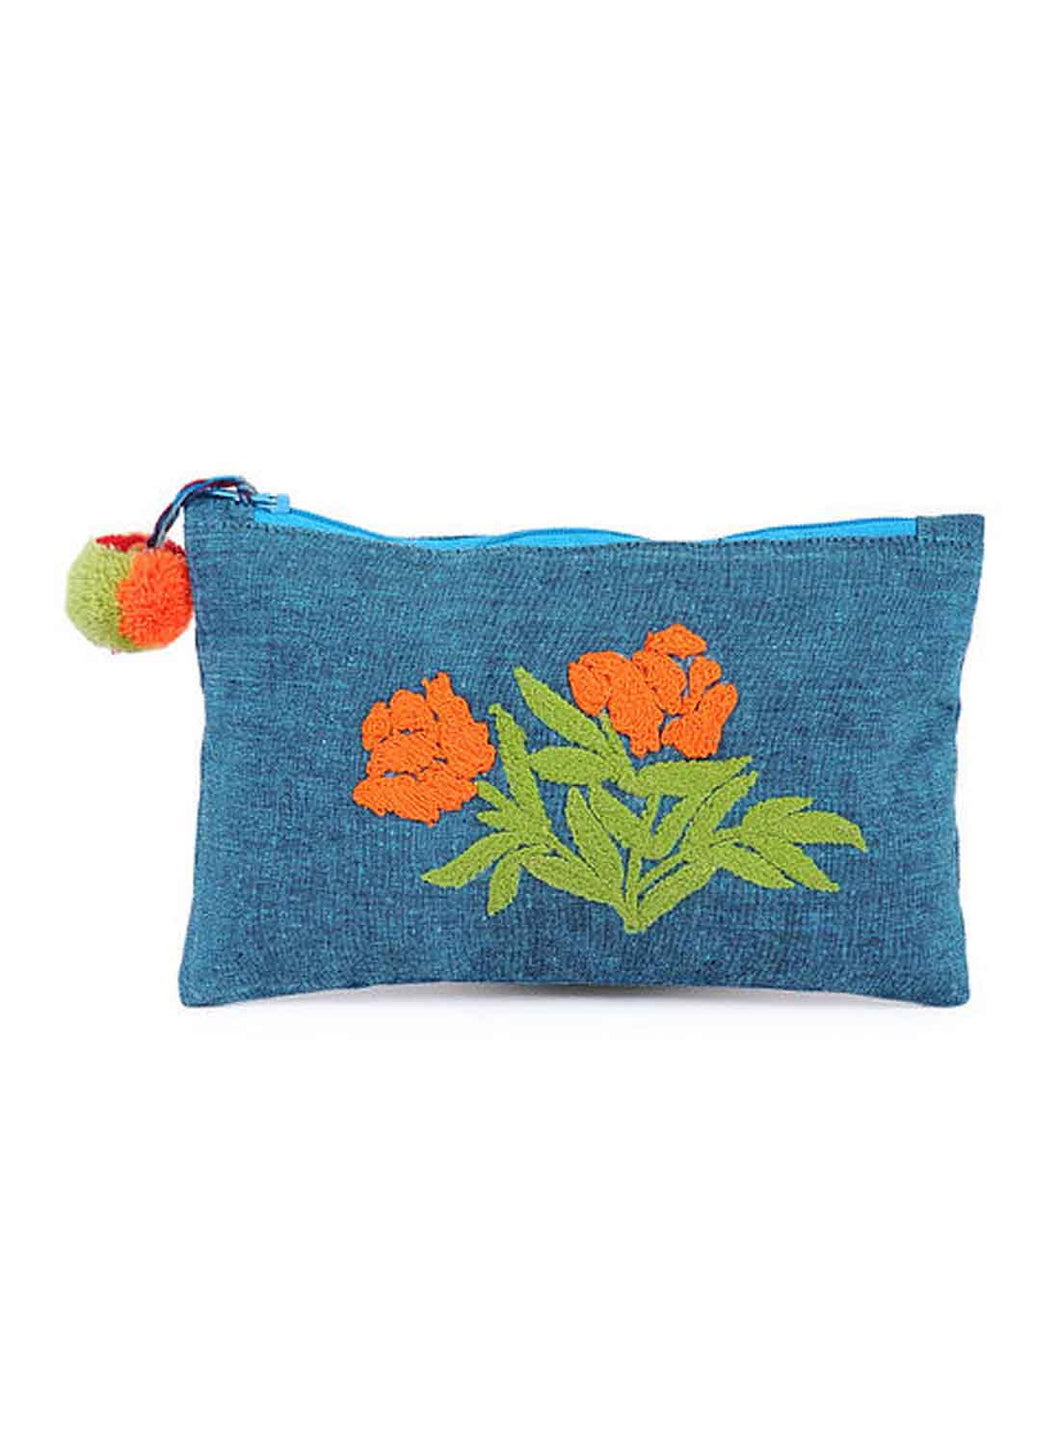 Kanyoga Teal Chambray Base Unique Embroidery Cotton Pouch With Pom Pom Attached For Women